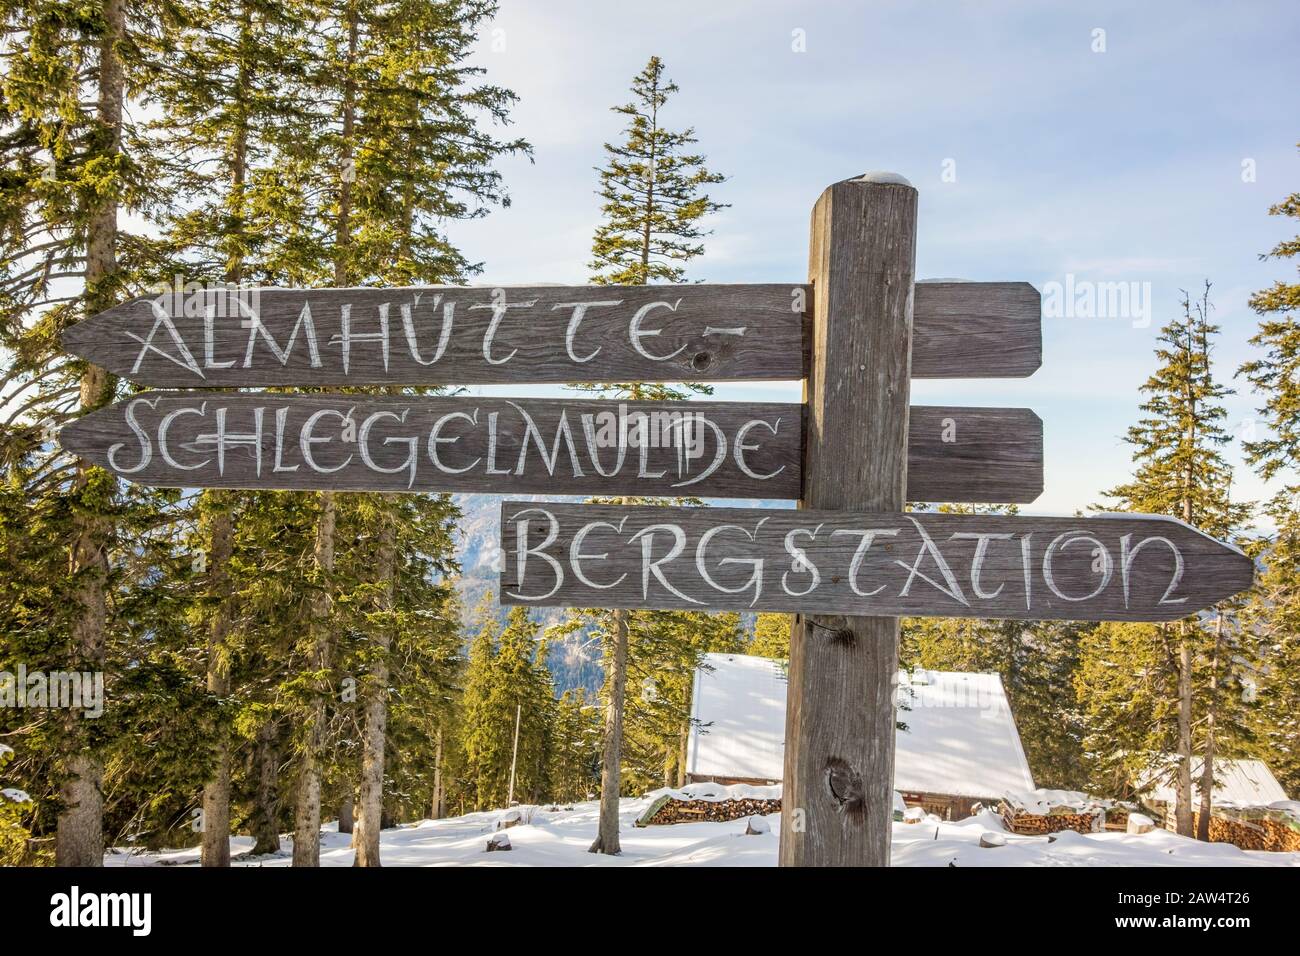 Mountain signpost showing the way to the alpine chalet ('Almhuette') and summit station ('Bergstation') in german language Stock Photo